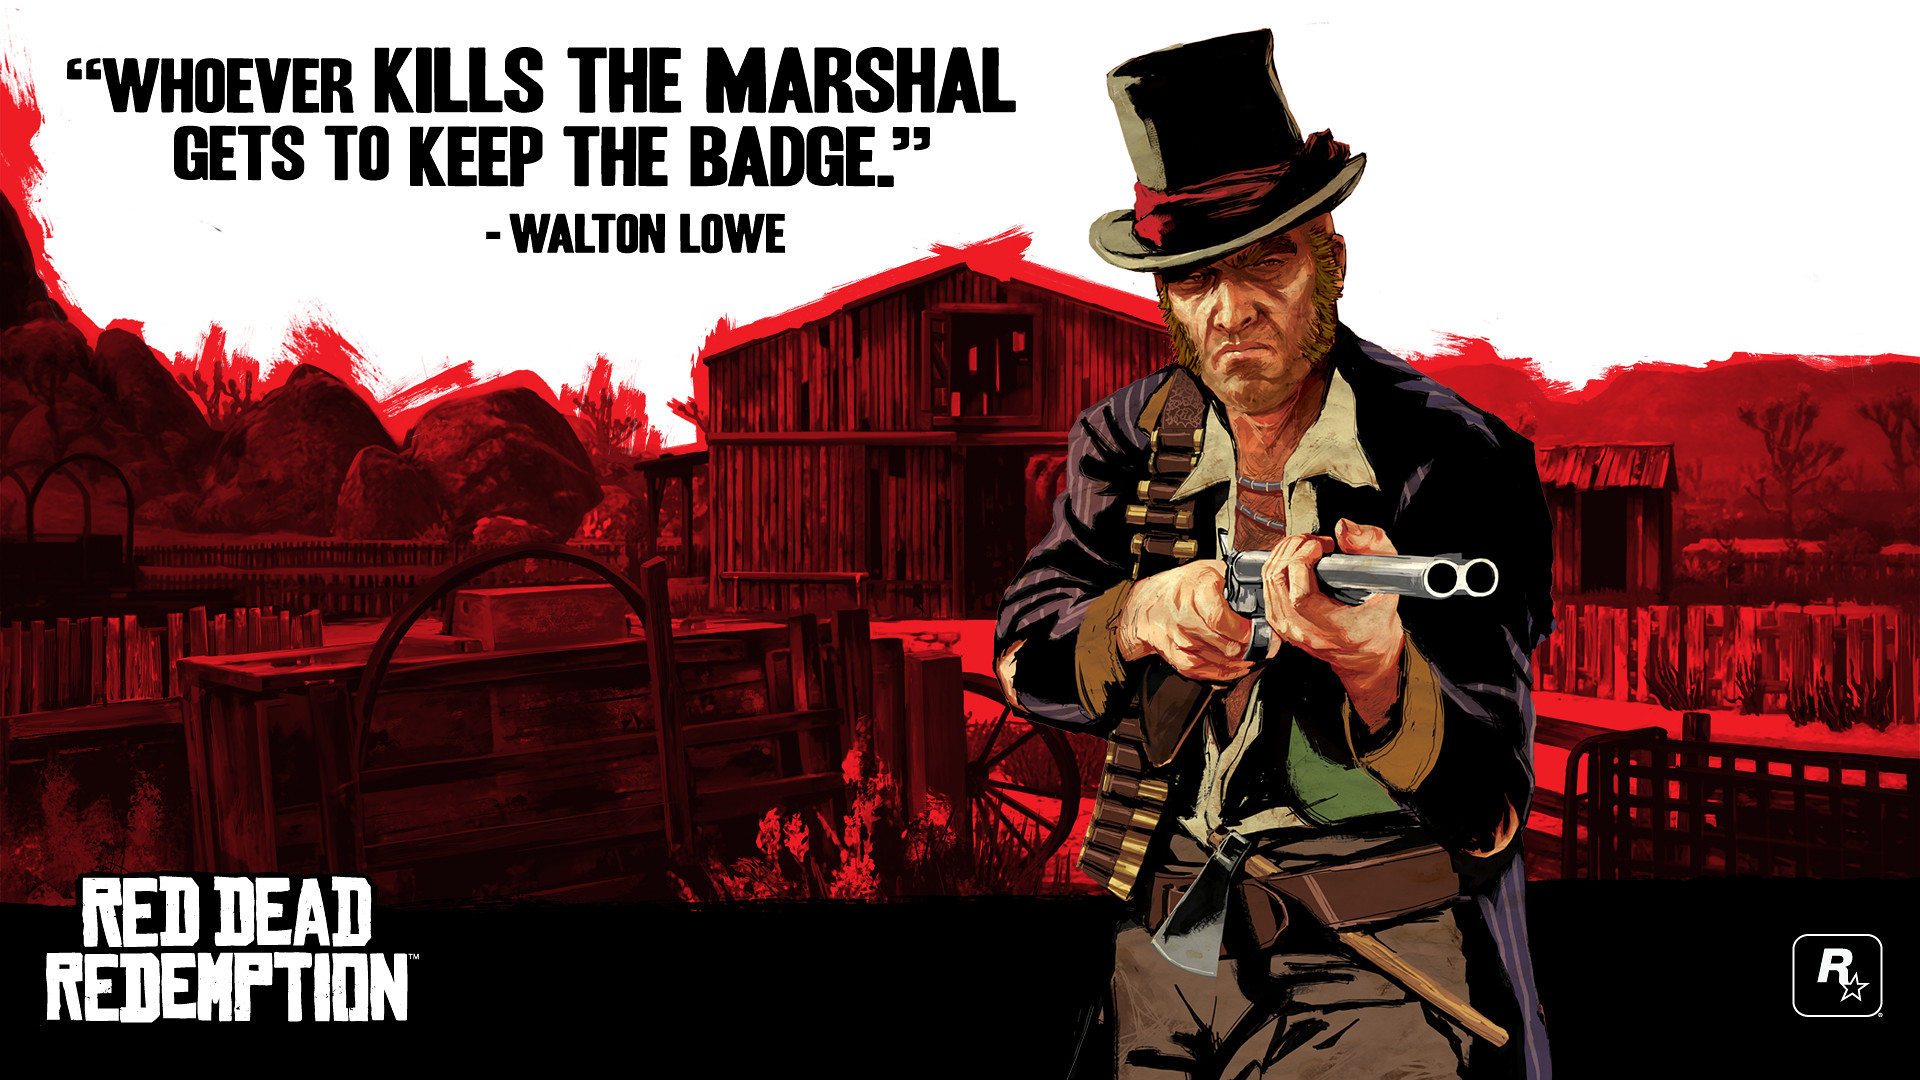 1920x1080 Red Dead Redemption | Red Dead Redemption wallpaper 6 - Jeux vidÃ©o -  Wallpapers Directory | Red Dead Redemption | Pinterest | Red dead  redemption, ...